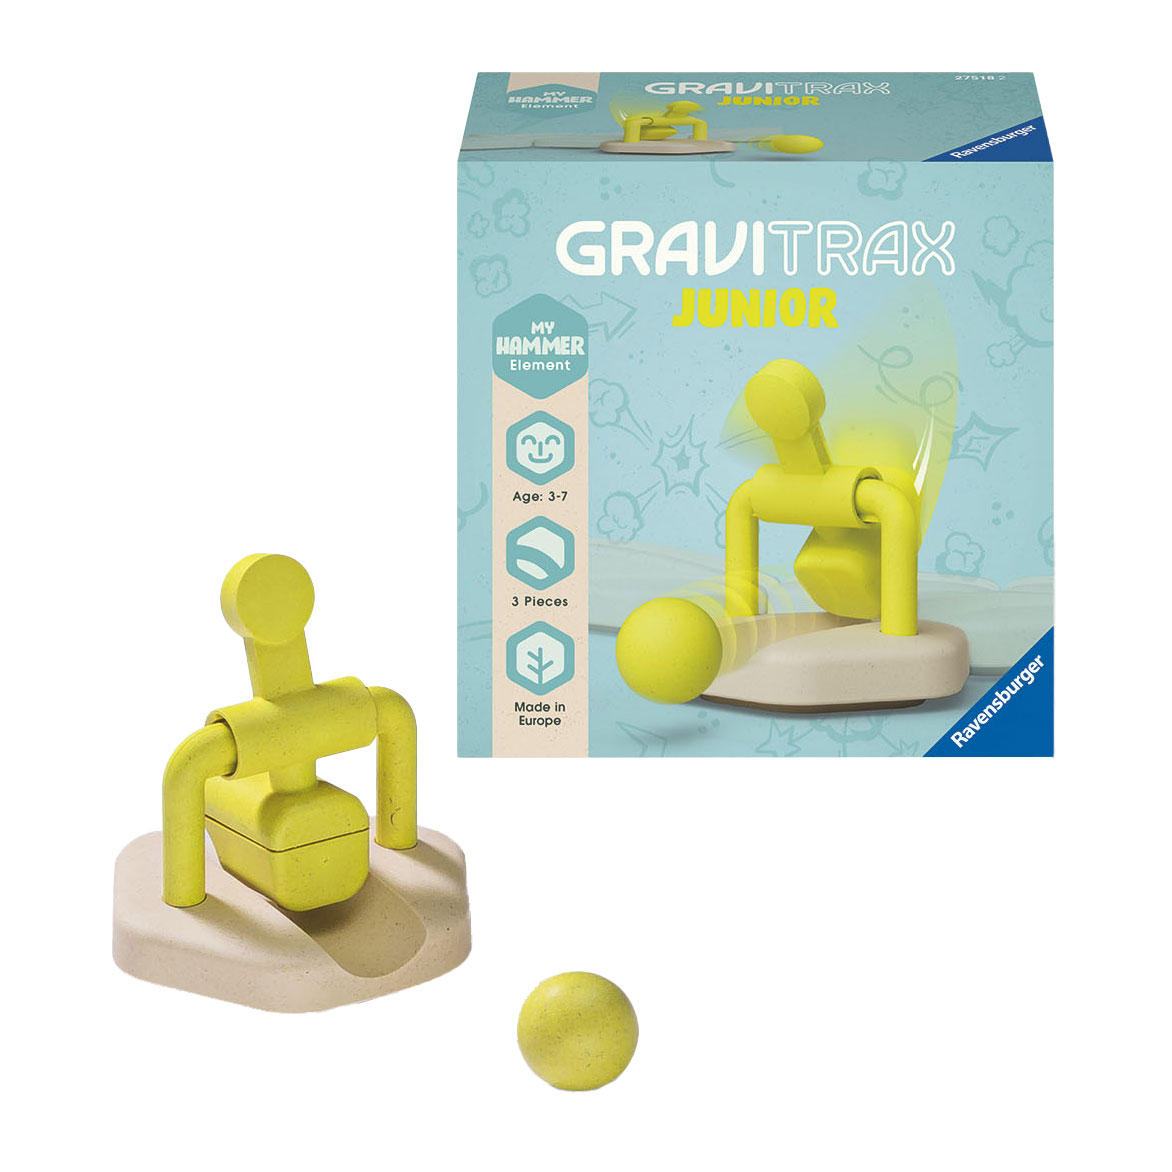 Ravensburger Gravitrax Extended Lifter Set Toy For Kids Age 8 & Up Endless  Indoor Perfect Activities for Families Toy STEM Hobby - AliExpress